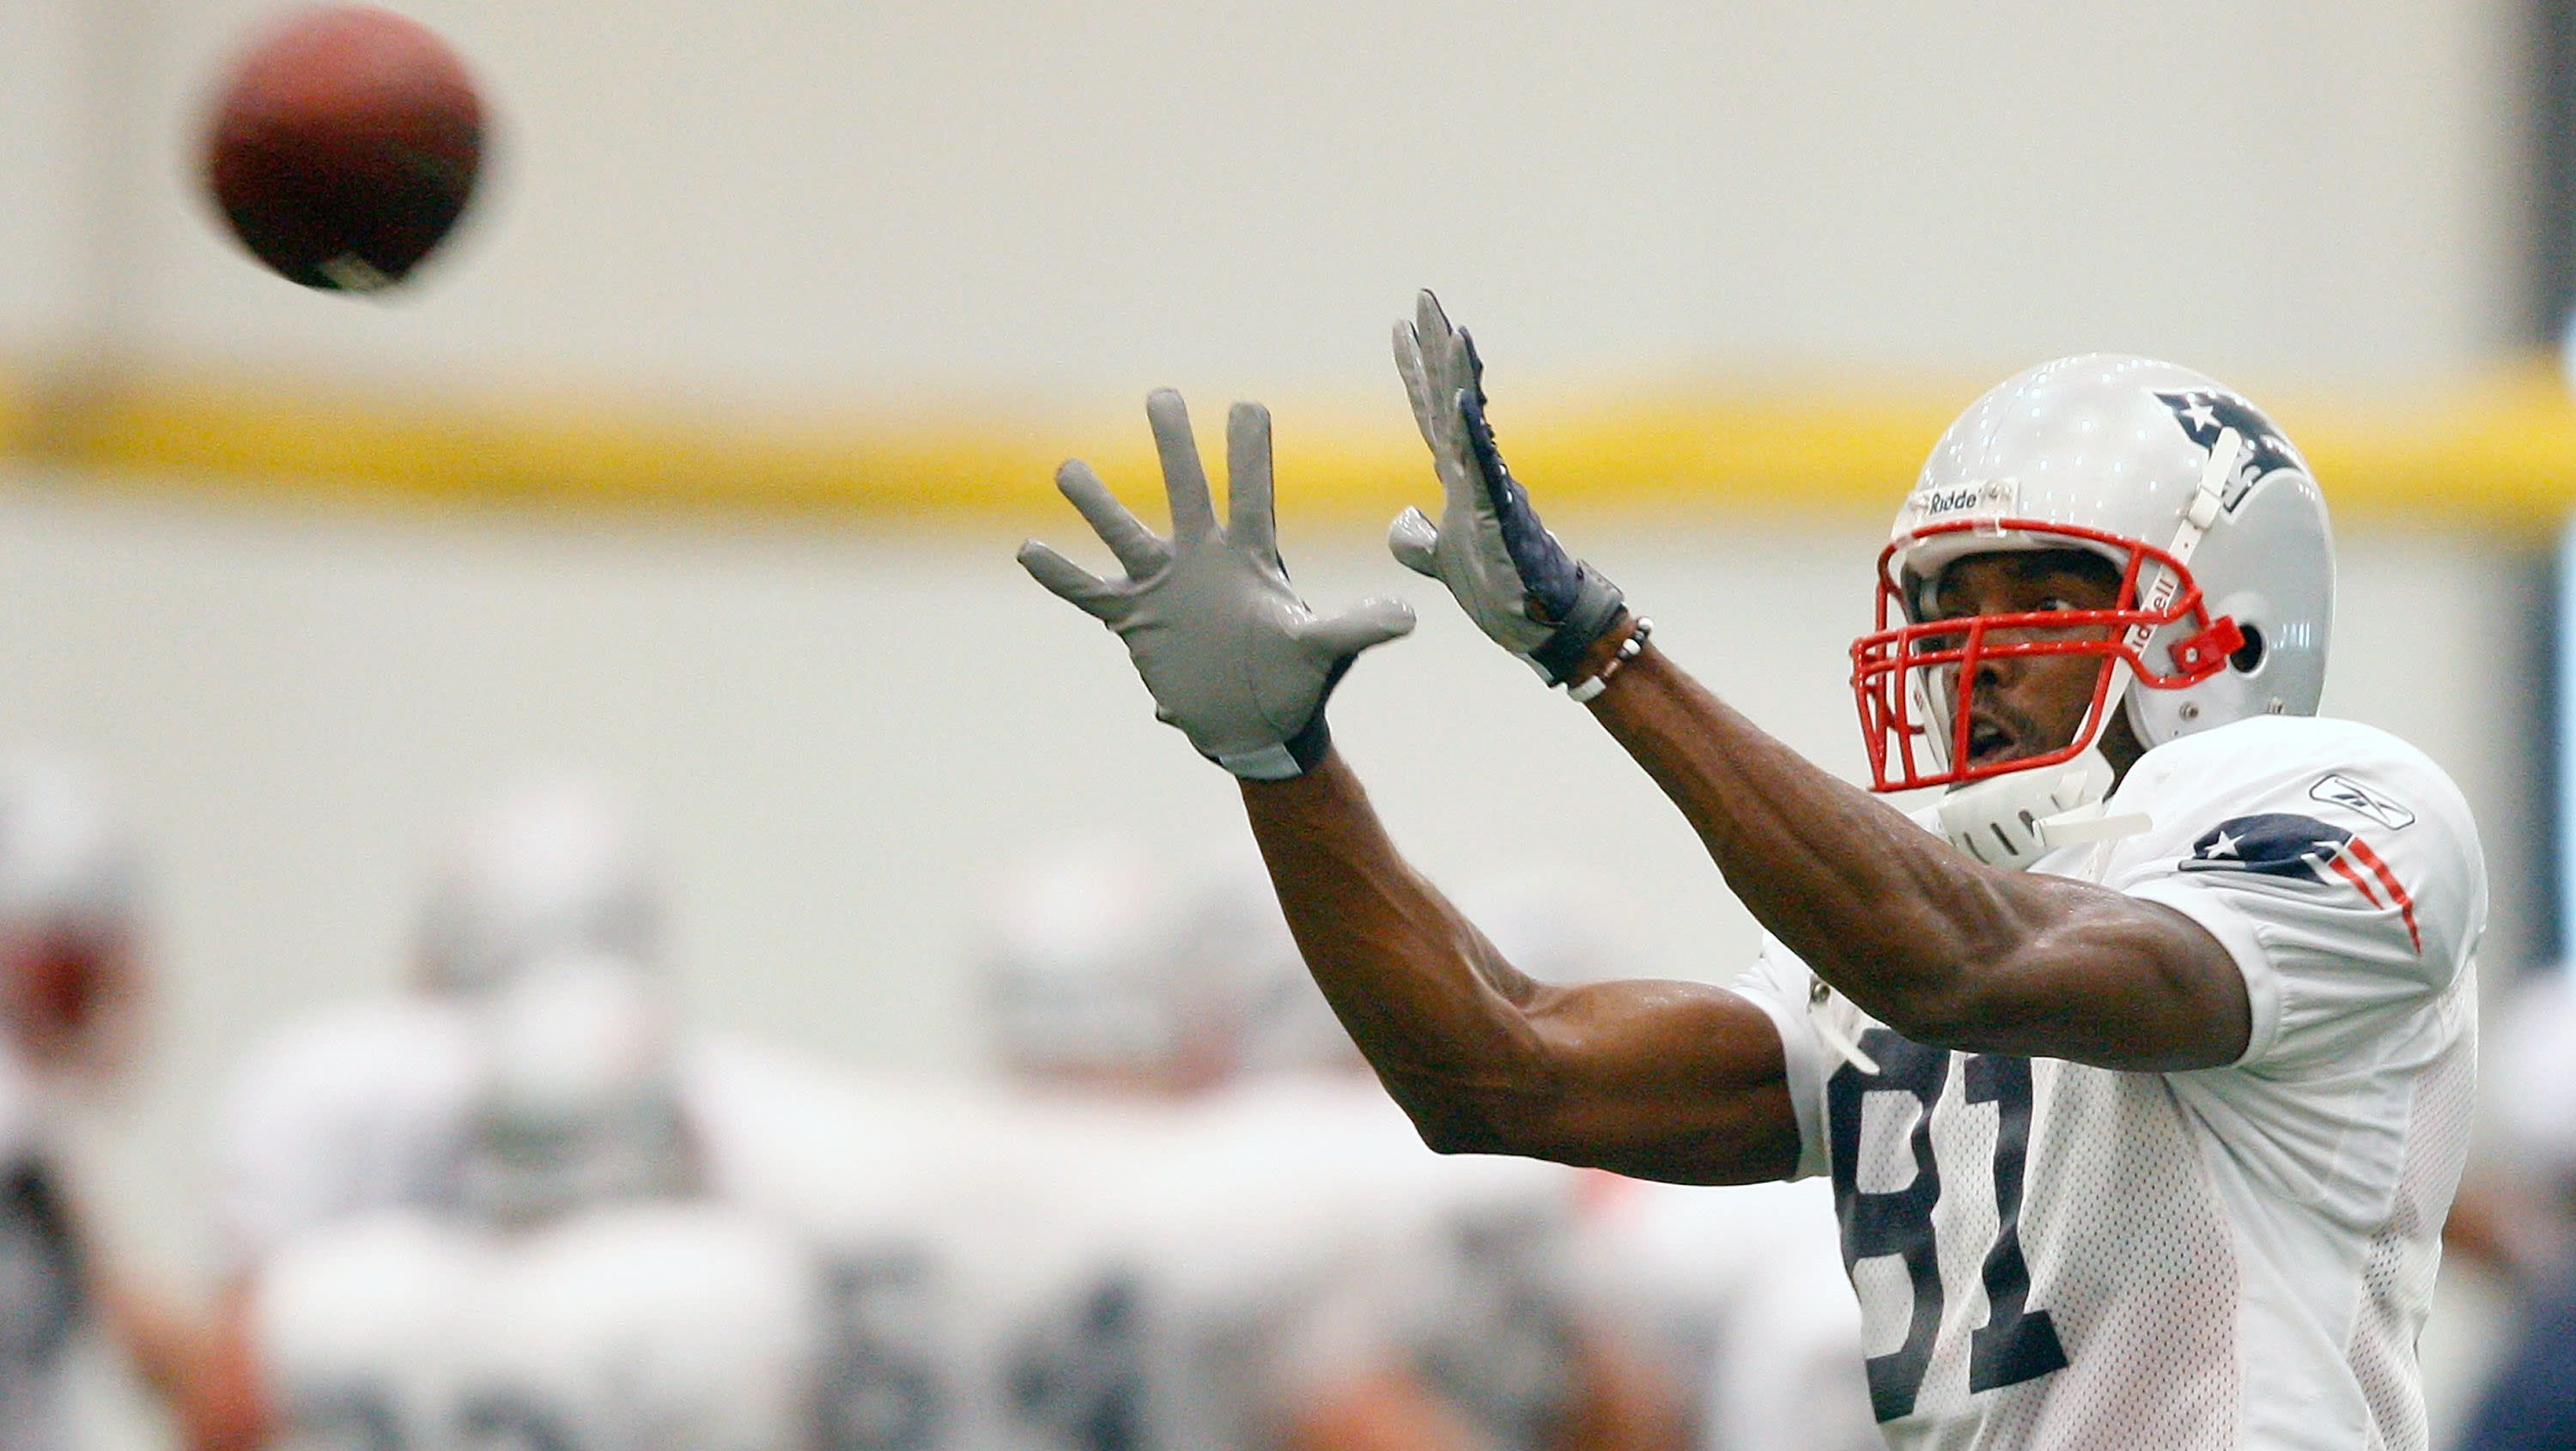 Patriots Rookie Is 'Mossing Defenders' at Training Camp